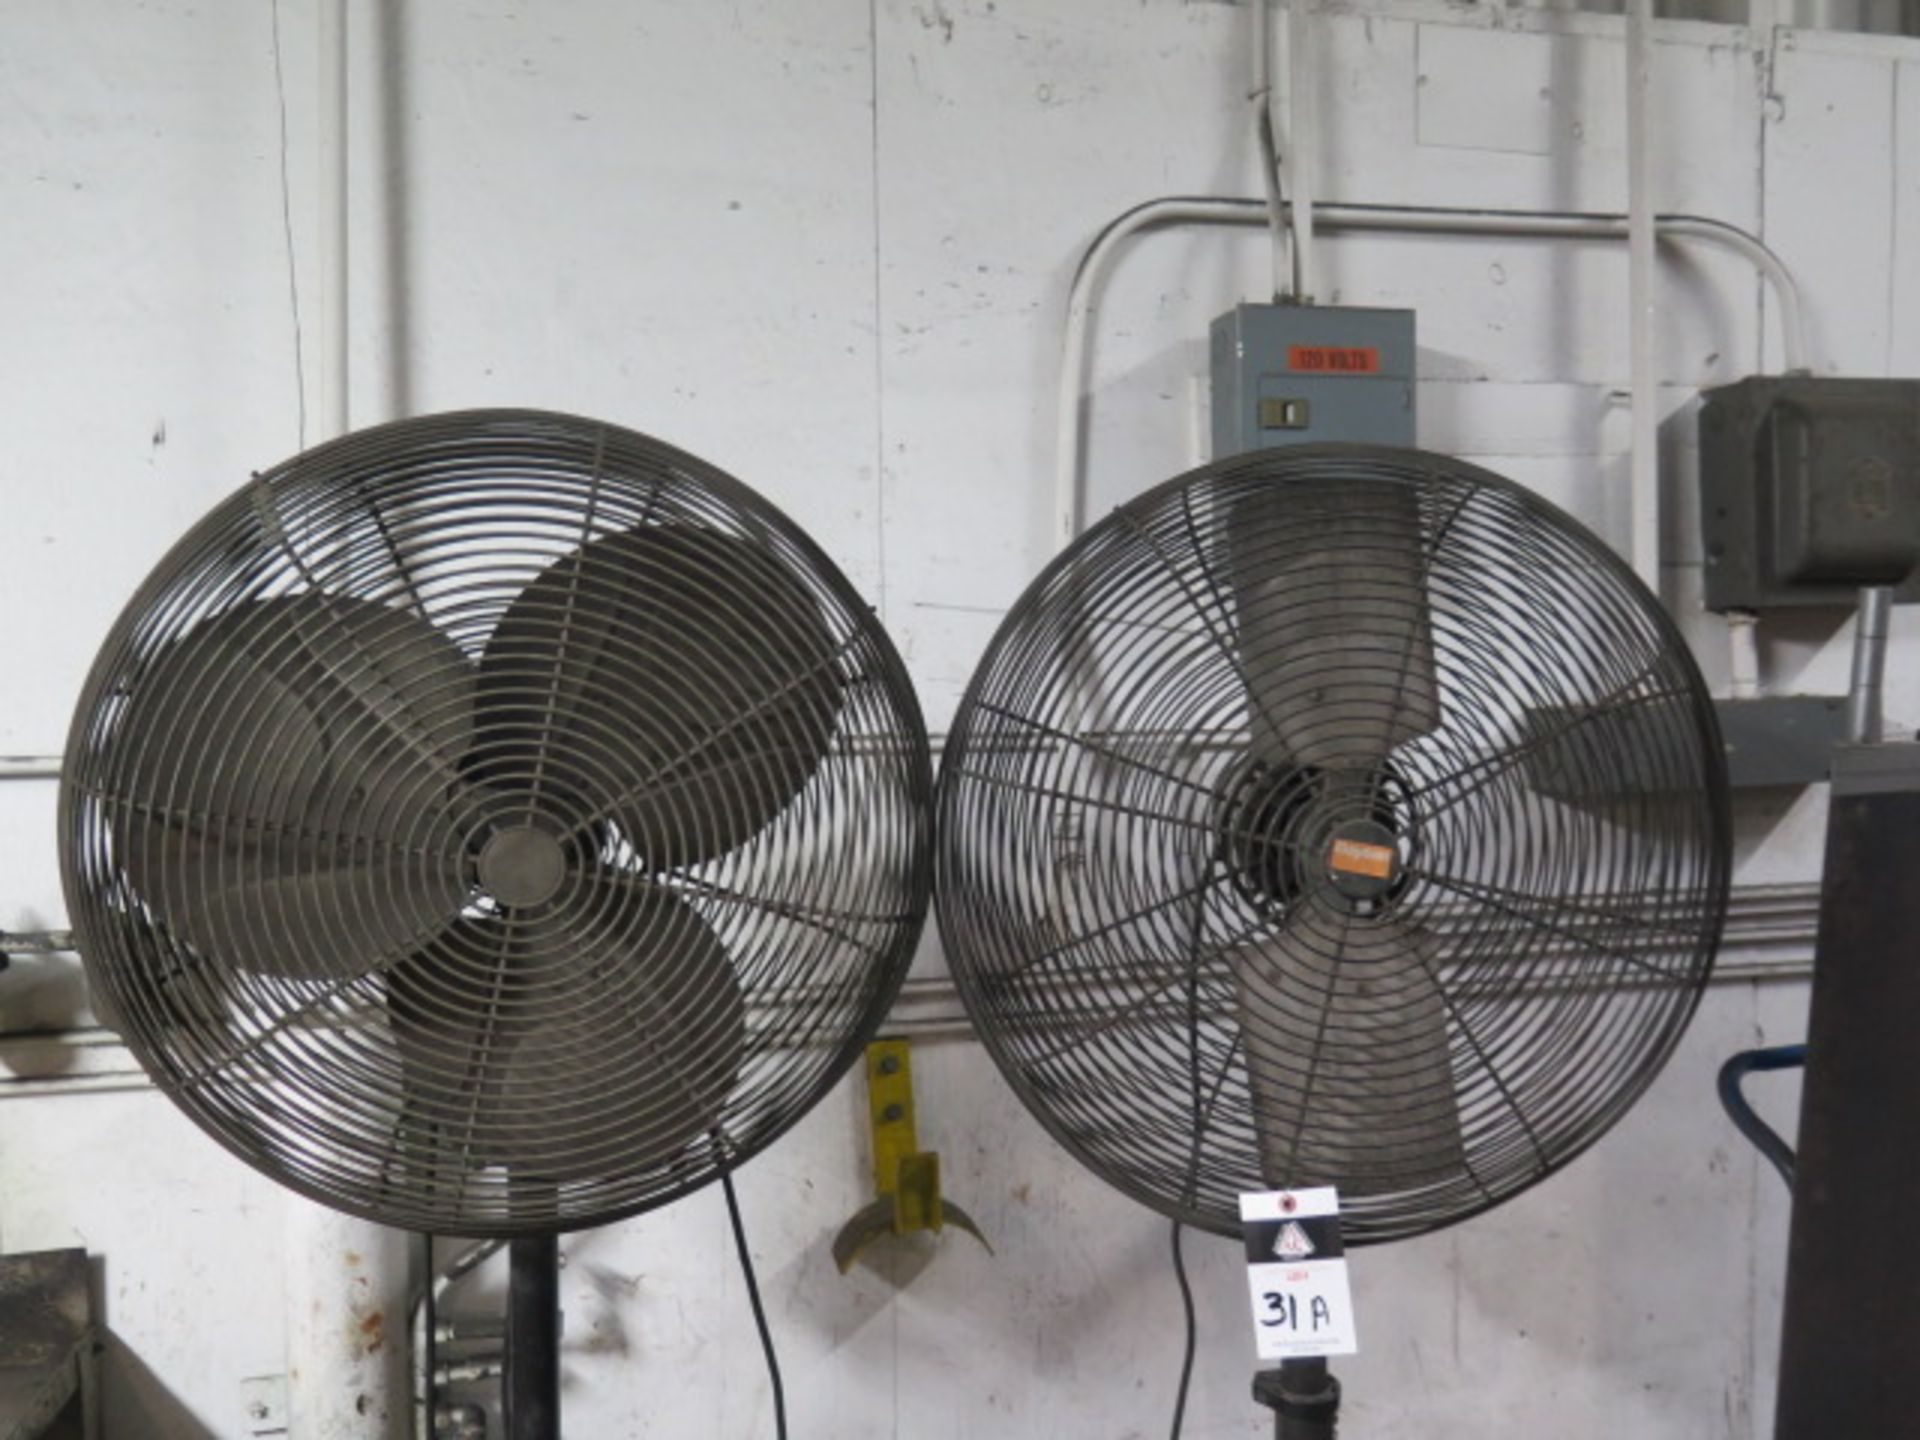 Shop Fans (2) (SOLD AS-IS - NO WARRANTY) - Image 2 of 3